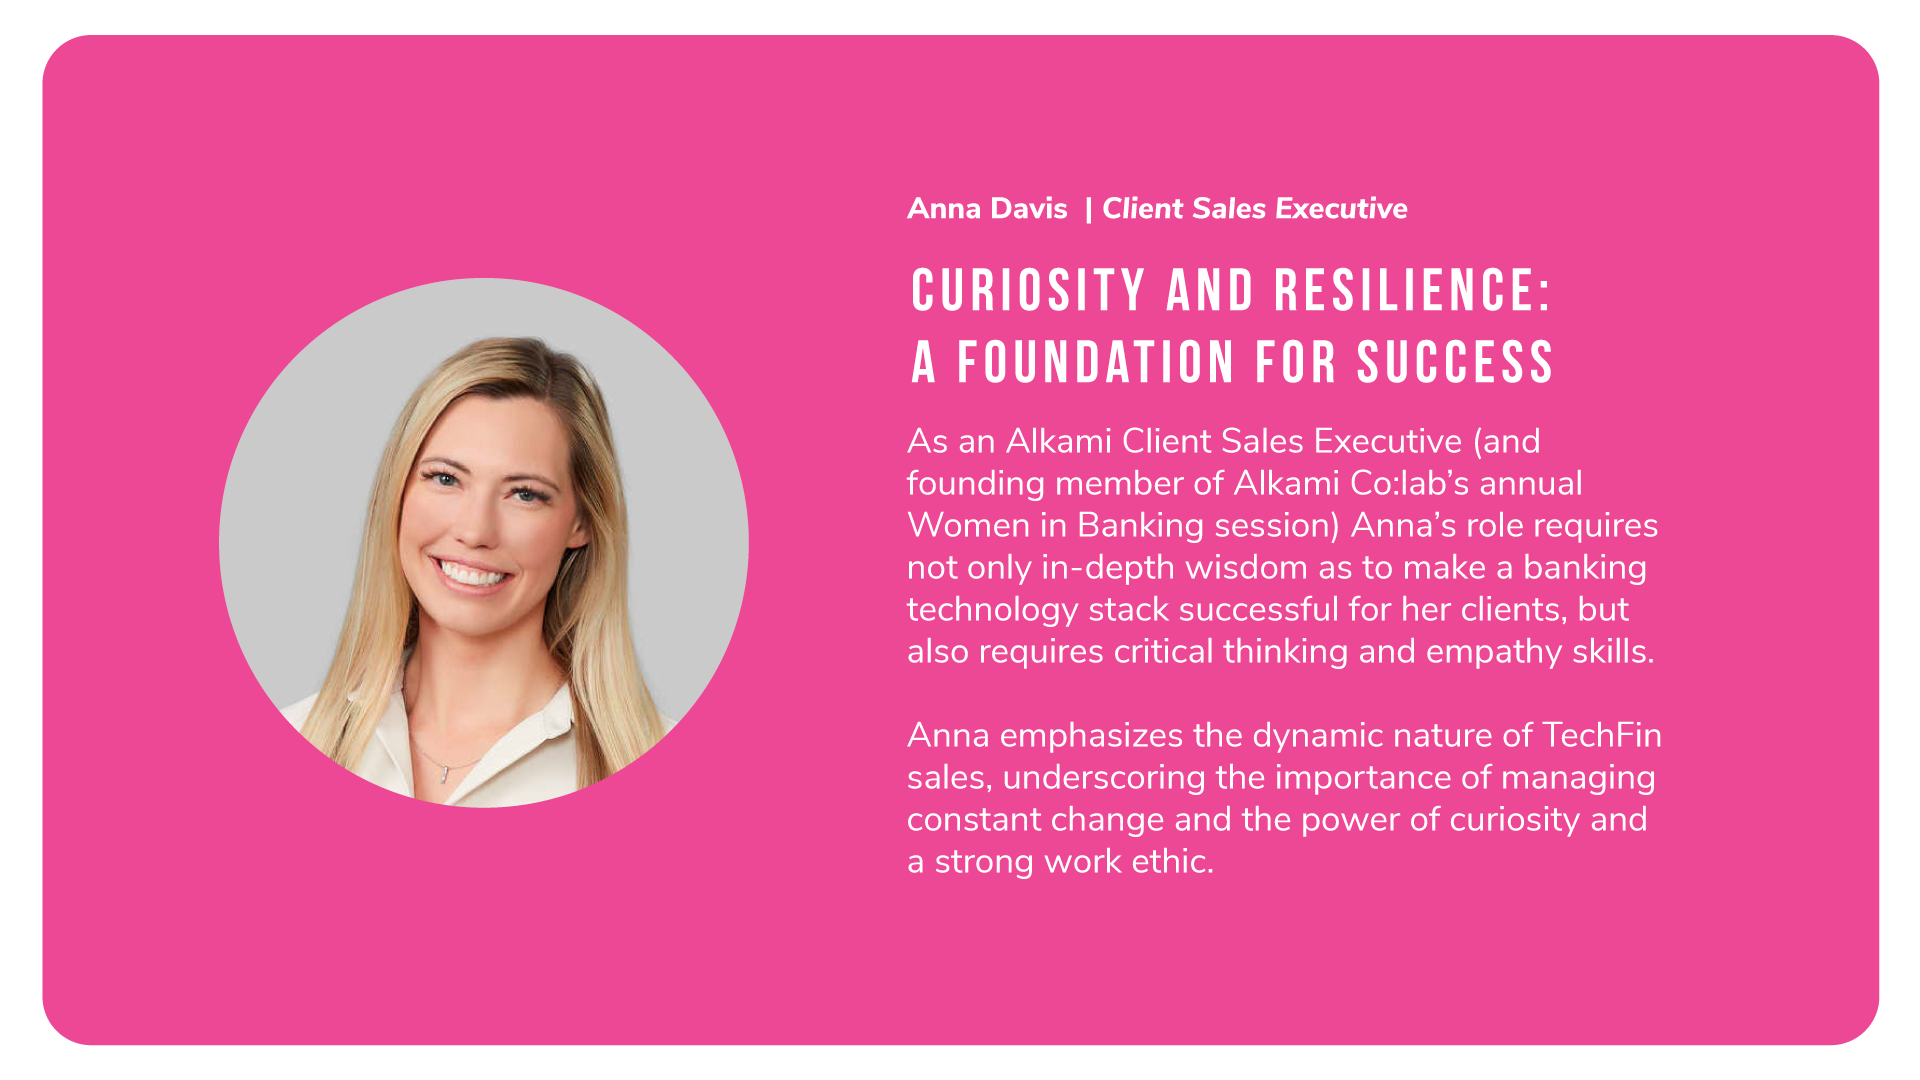 Anna Davis of Alkami says: Curiosity and resilience are the foundation for success